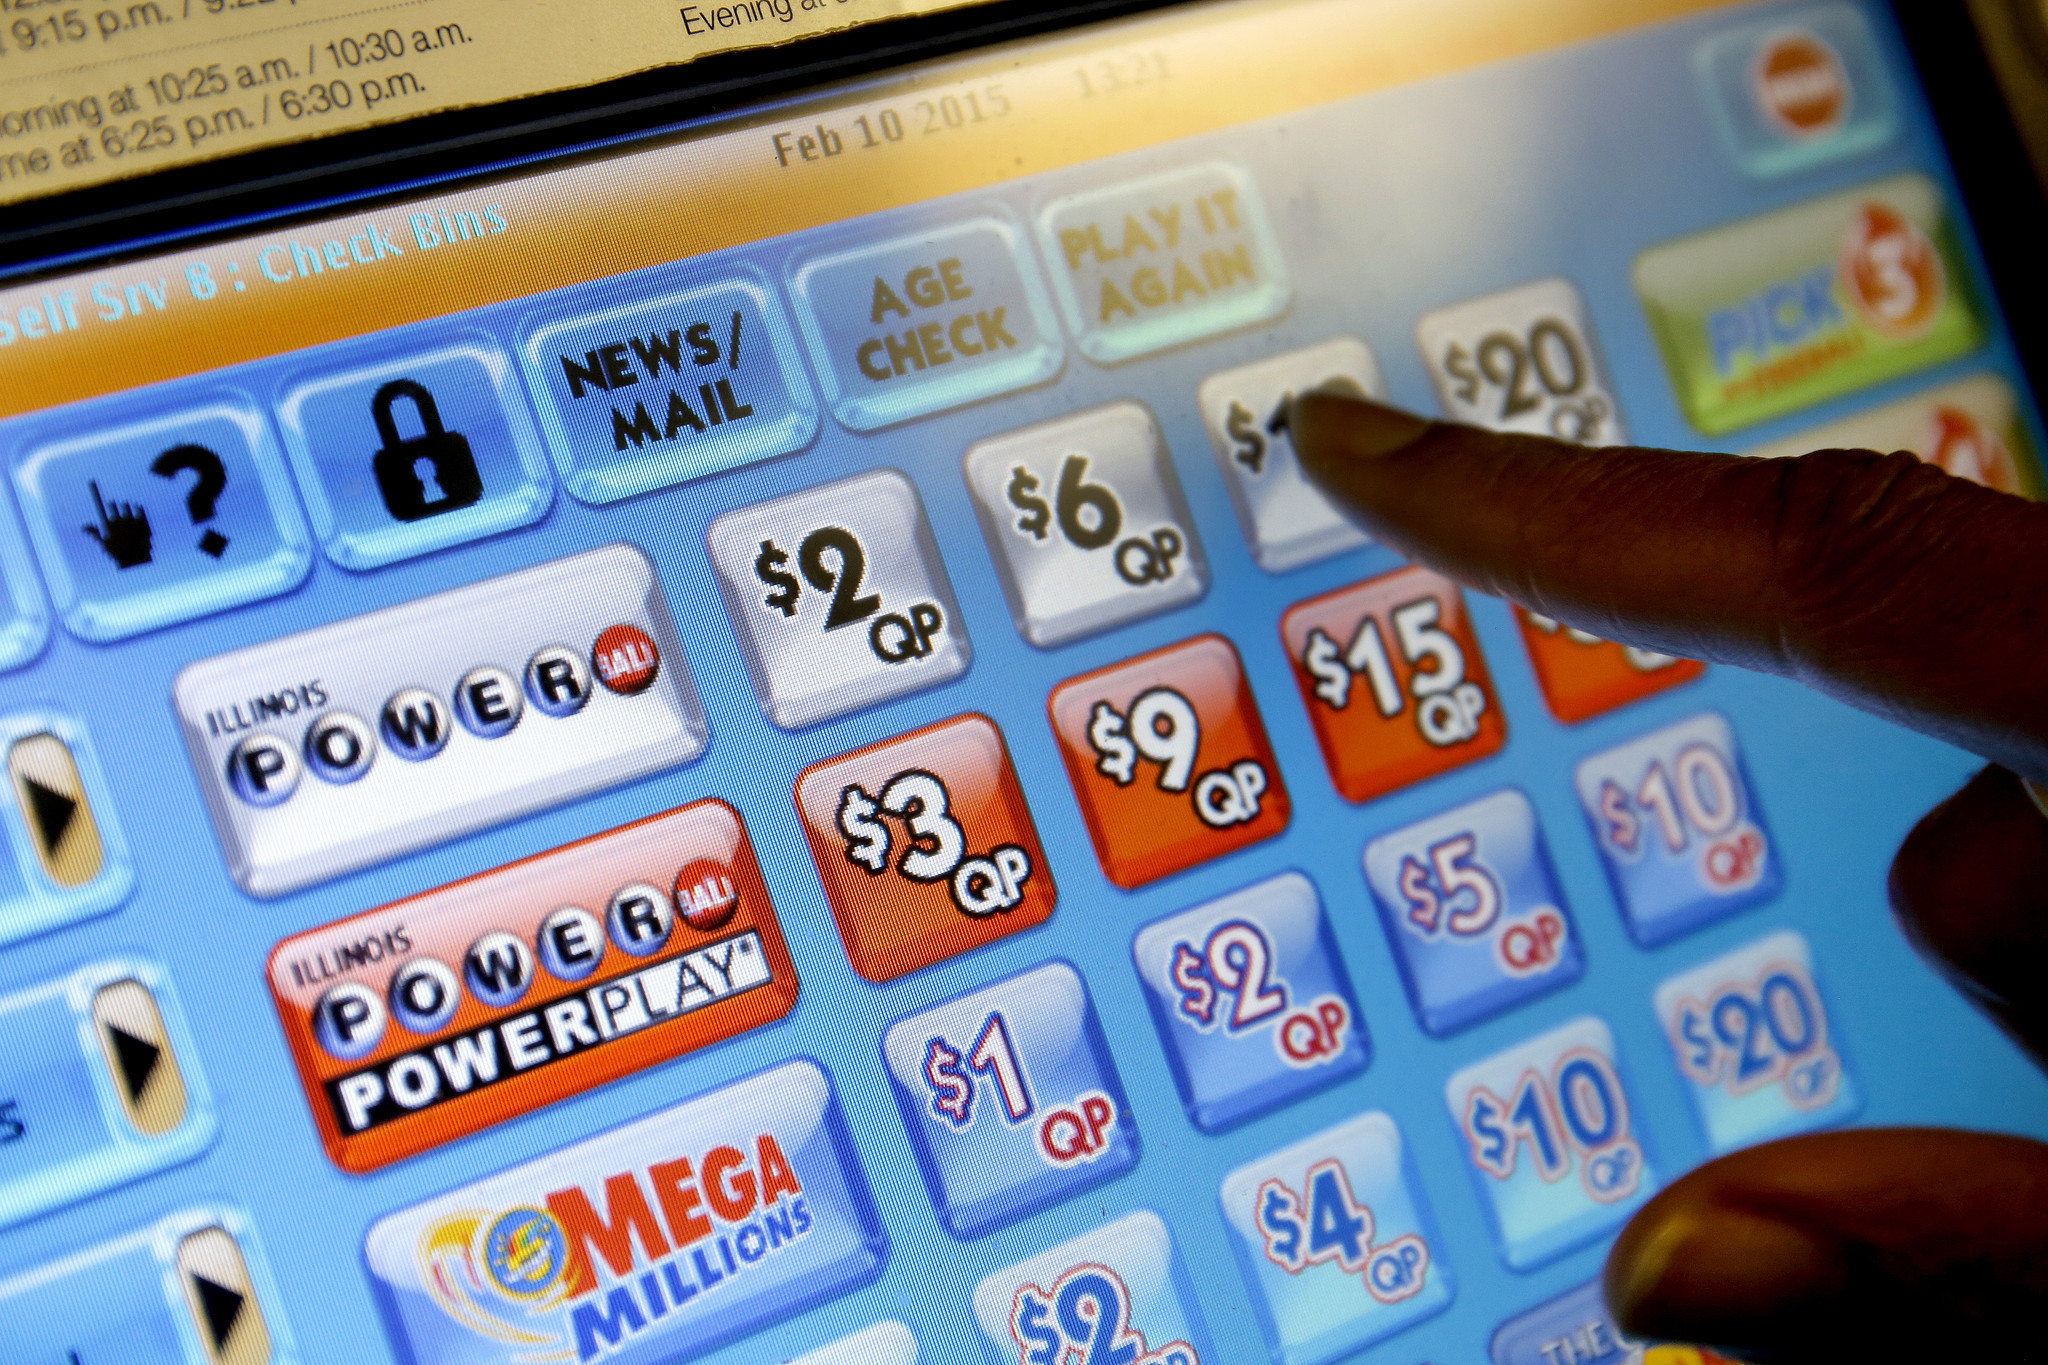 Powerball jackpot rises to $400M after no grand prize winners in Saturday drawing ...2048 x 1365